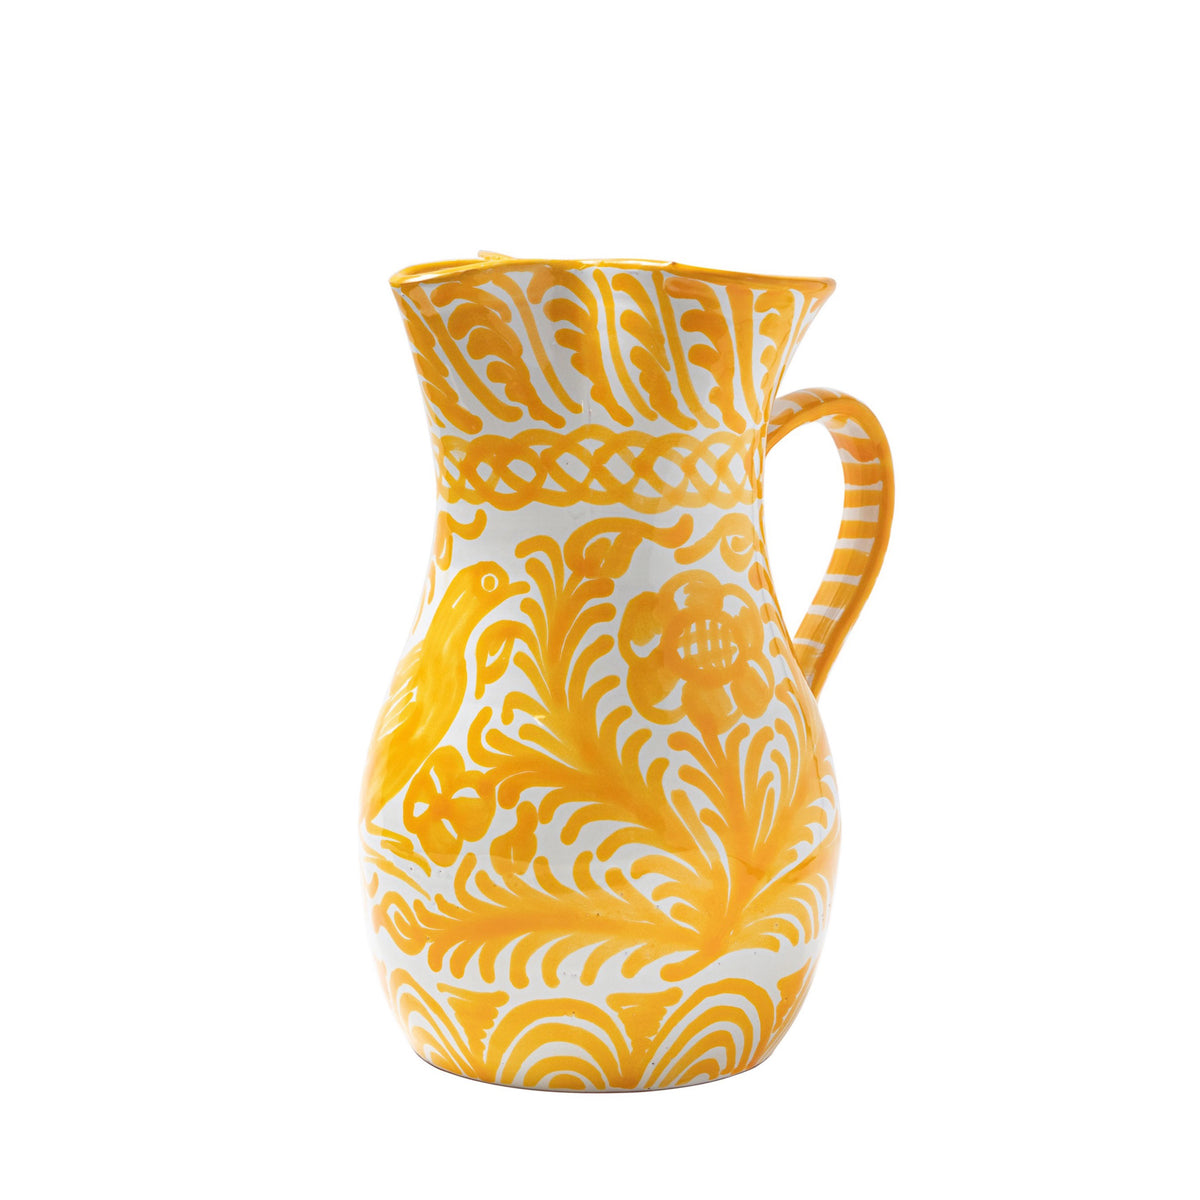 Casa Amarilla Large Pitcher with Hand-painted Designs